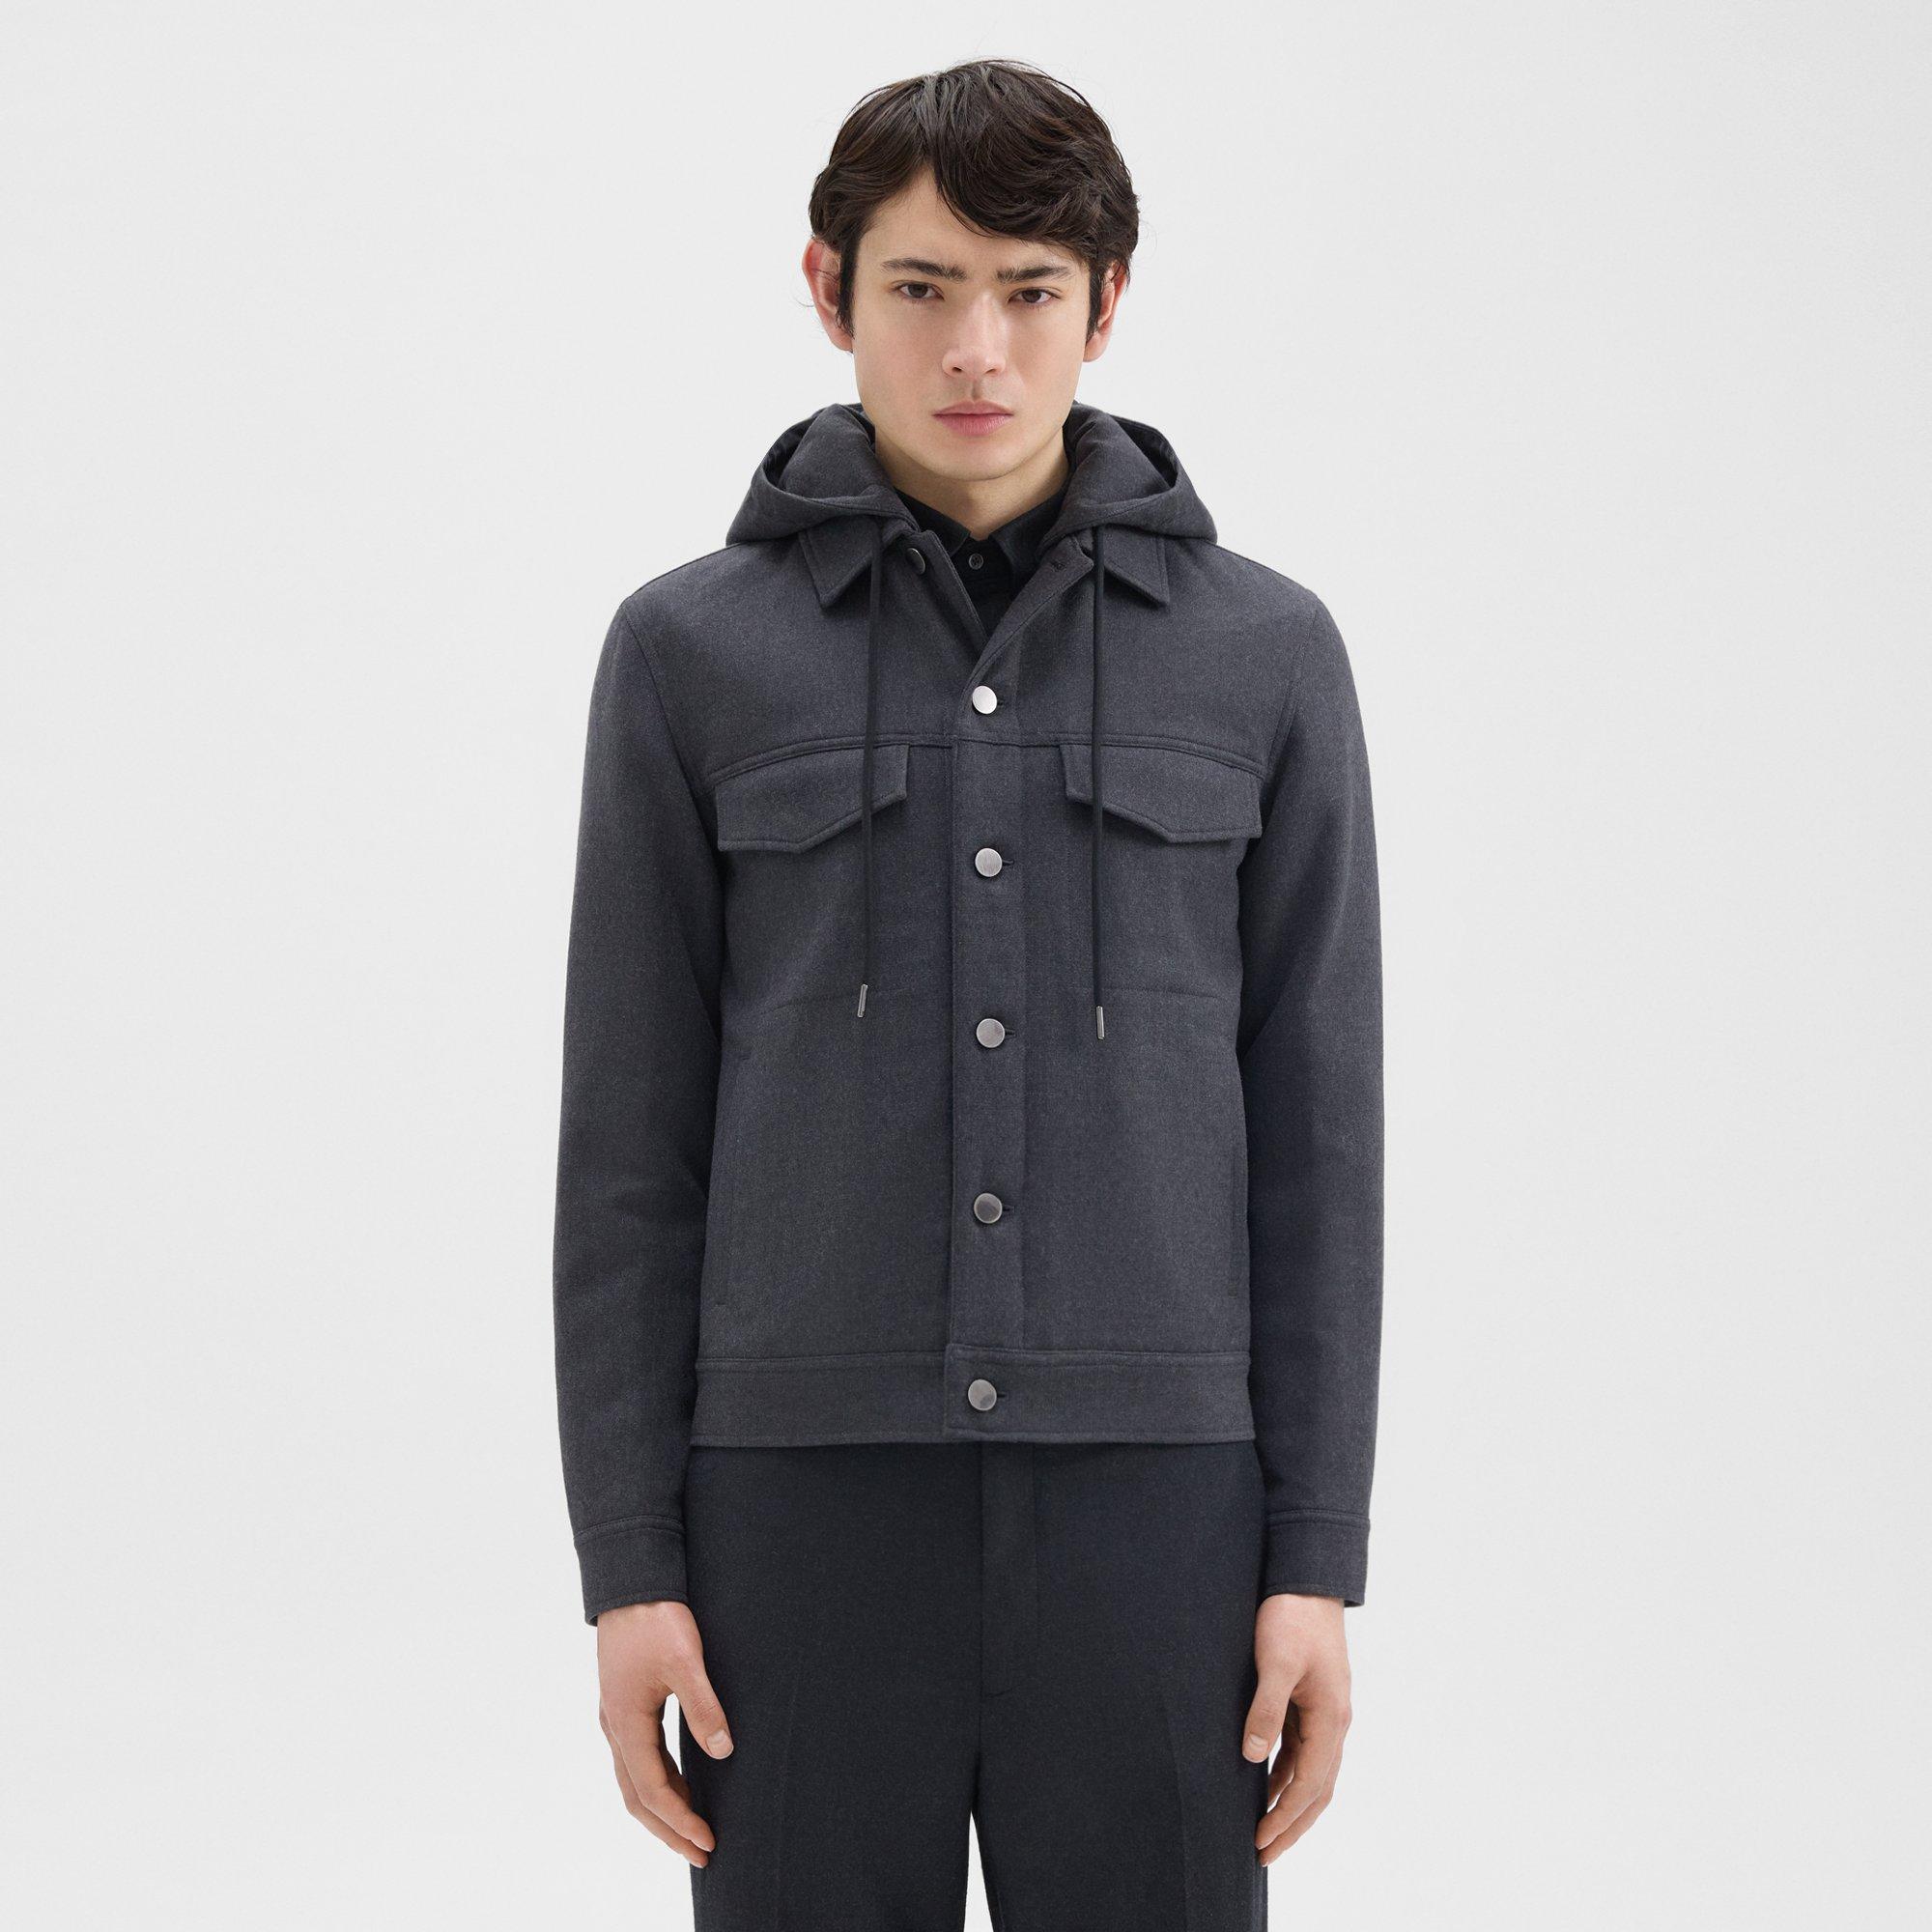 Theory Damien Hooded Jacket in Double-Face Wool Flannel